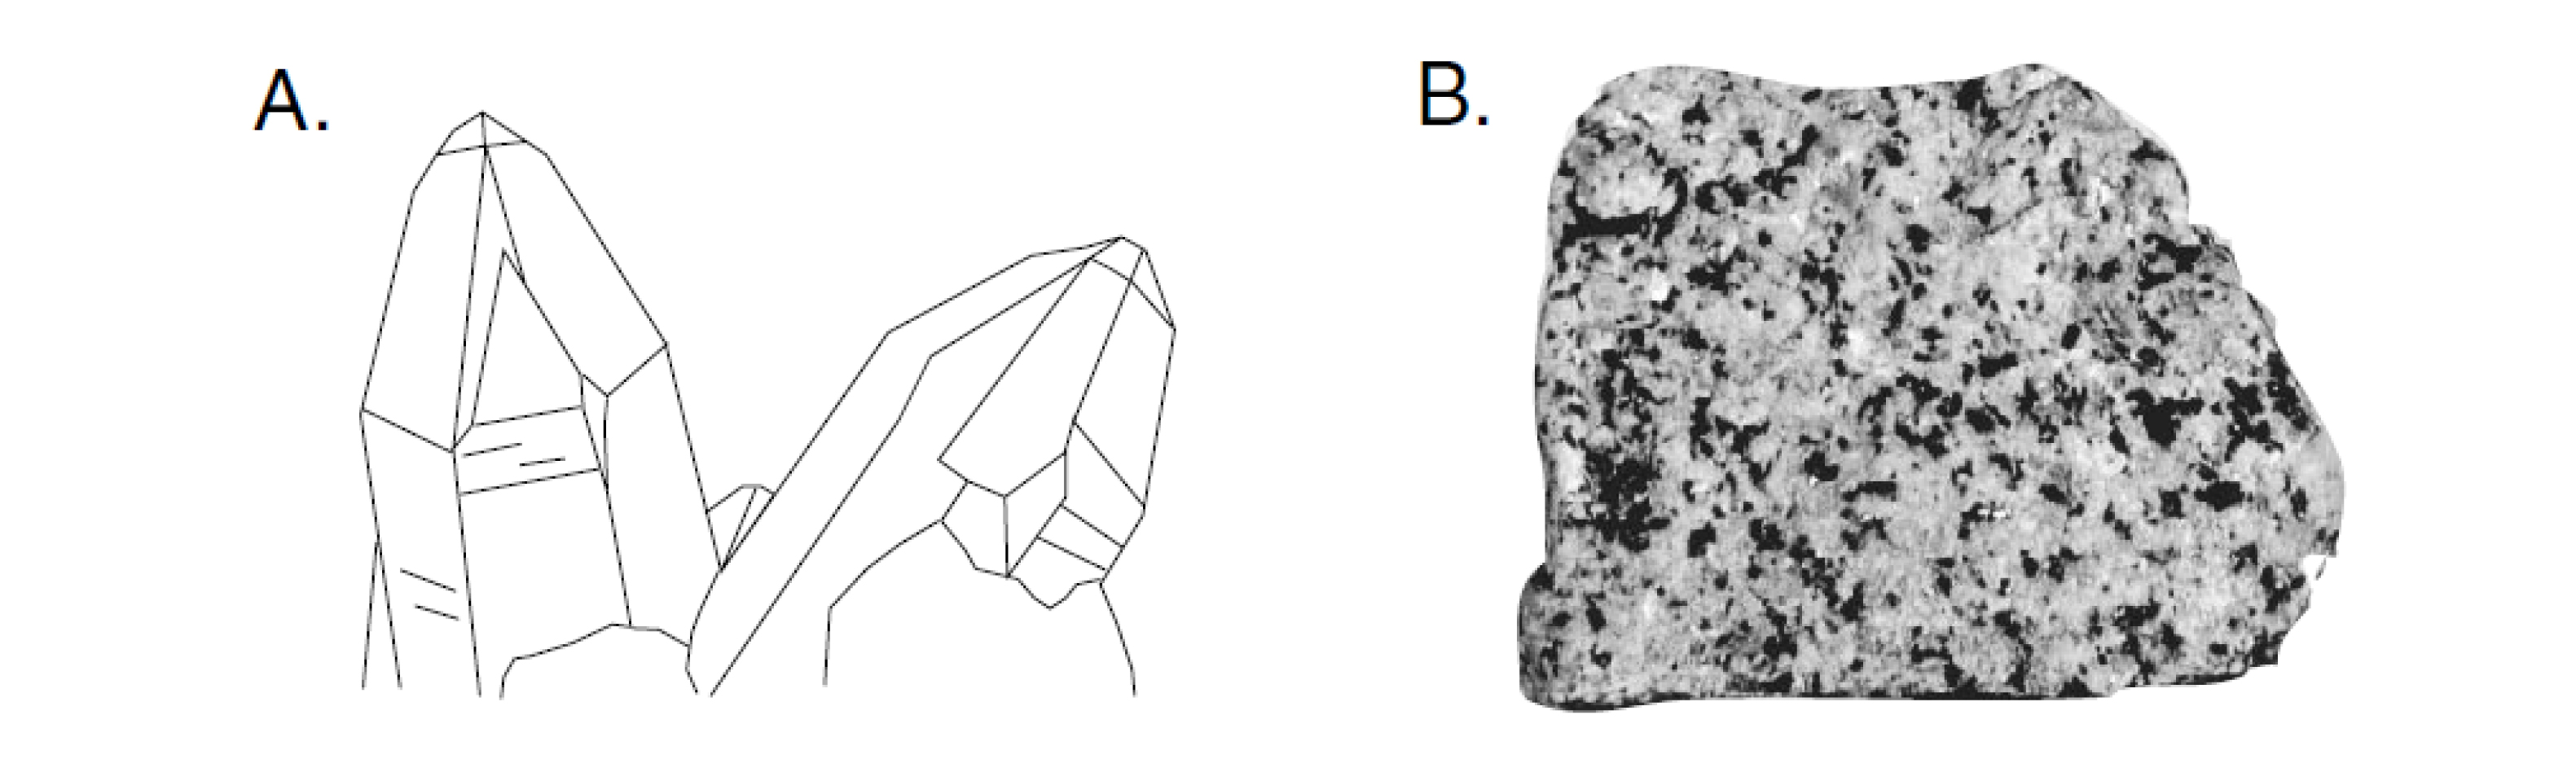 (A) Individual crystals with well-developed crystalform. (B) Rock made up of many mineral crystals combined.